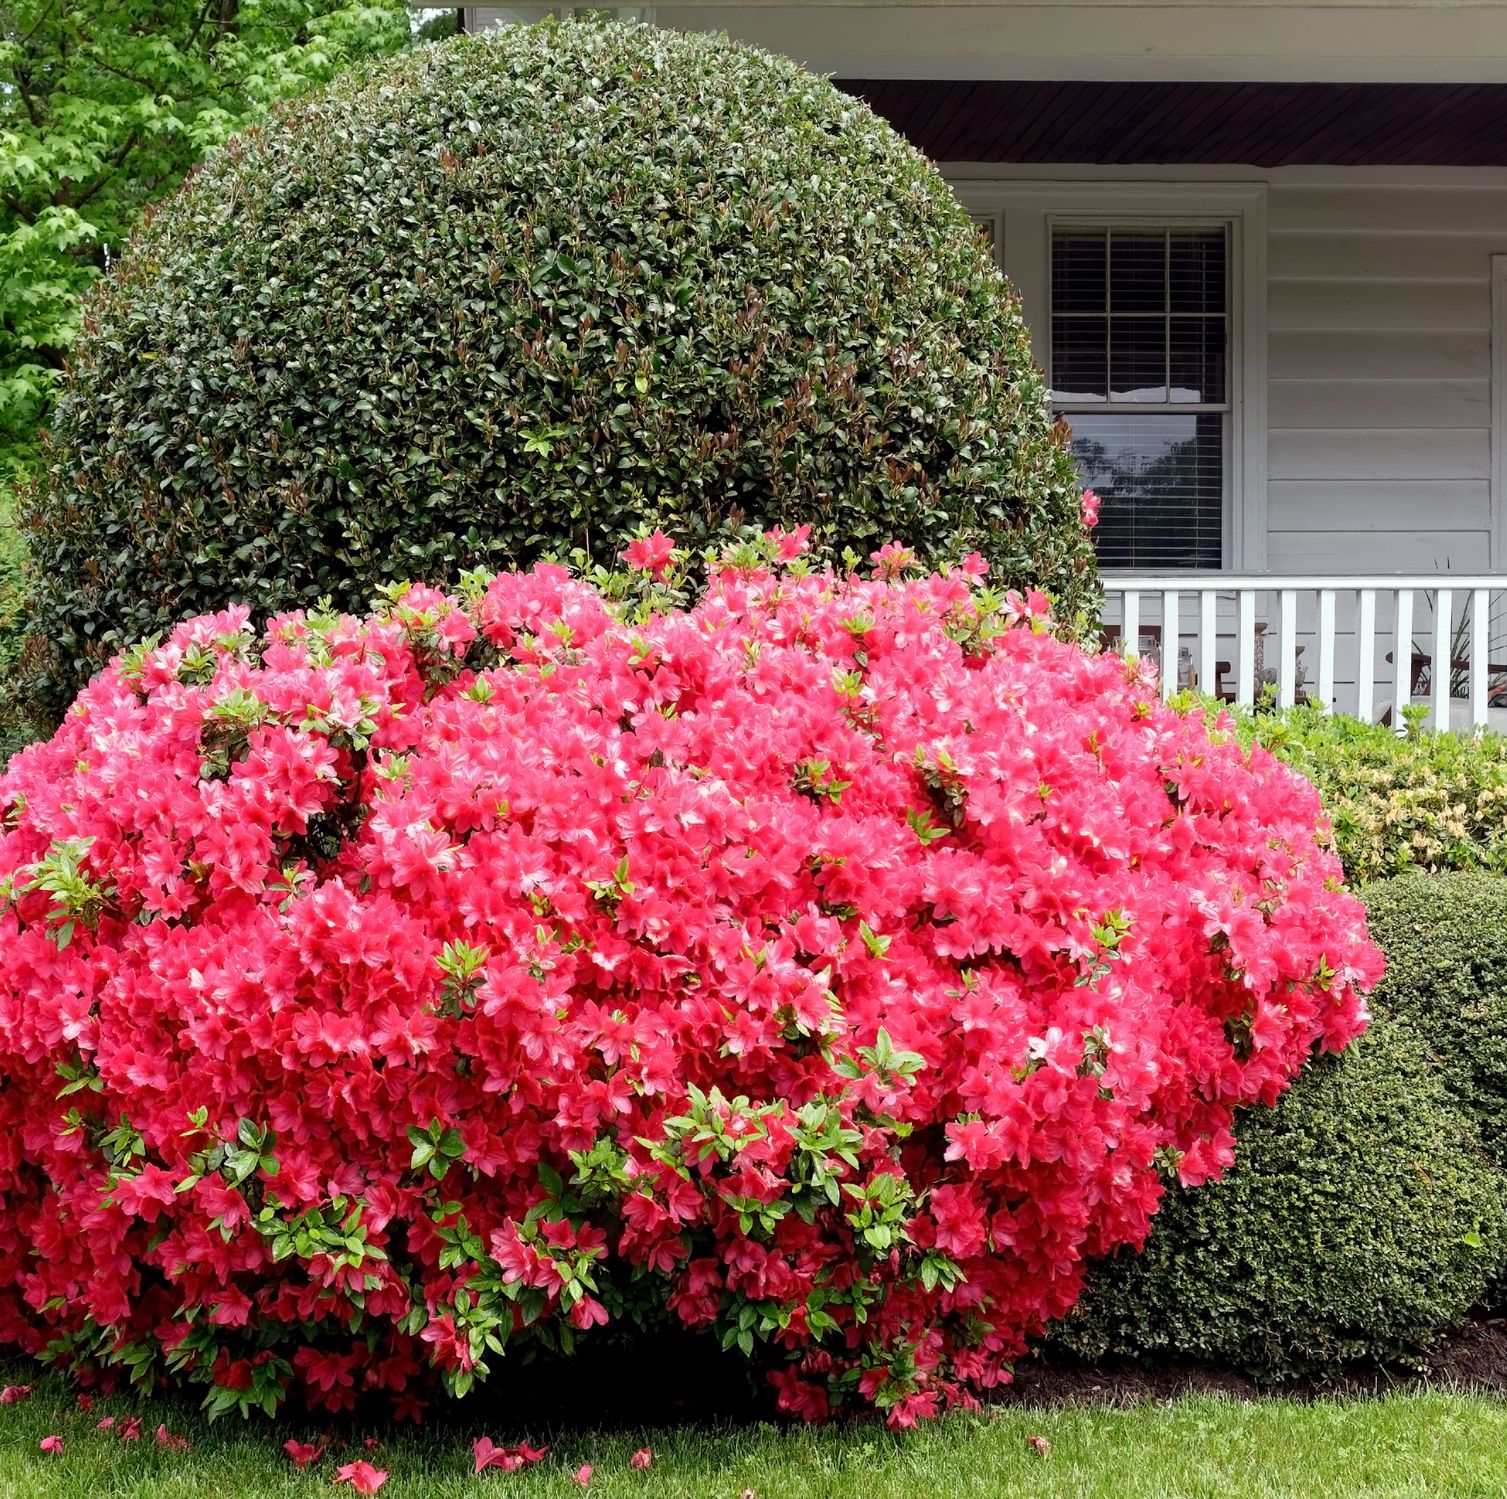 Want to Increase Curb Appeal? Plant Azalea Bushes in Your Yard!